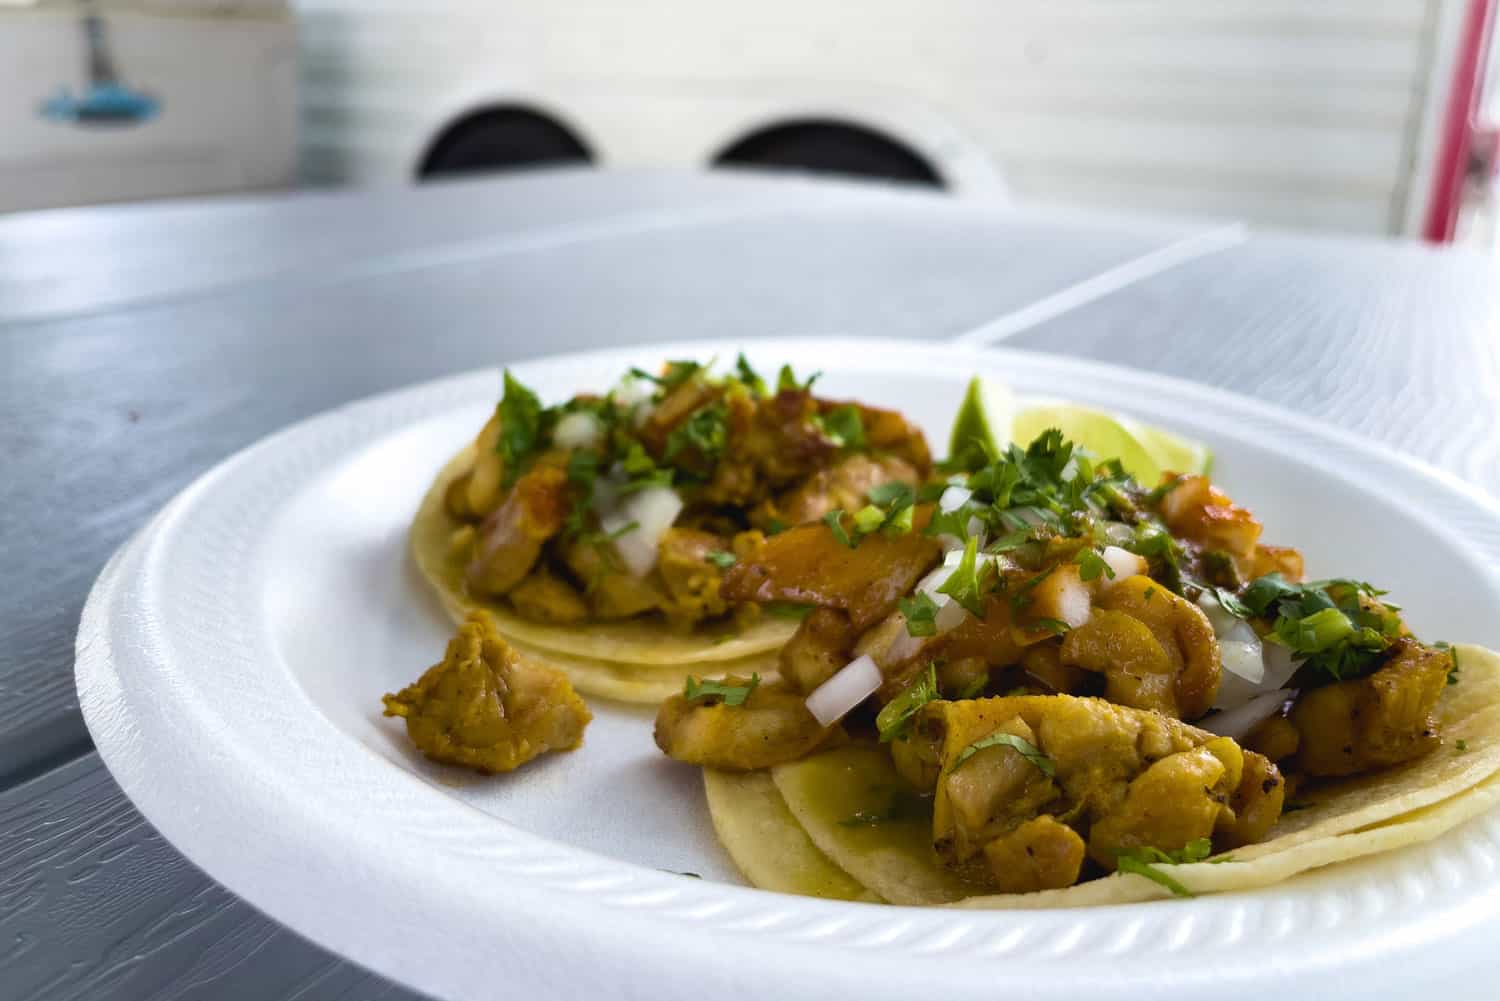 Tacos on Disposable paper Plate as Part of Taco Stand Photo